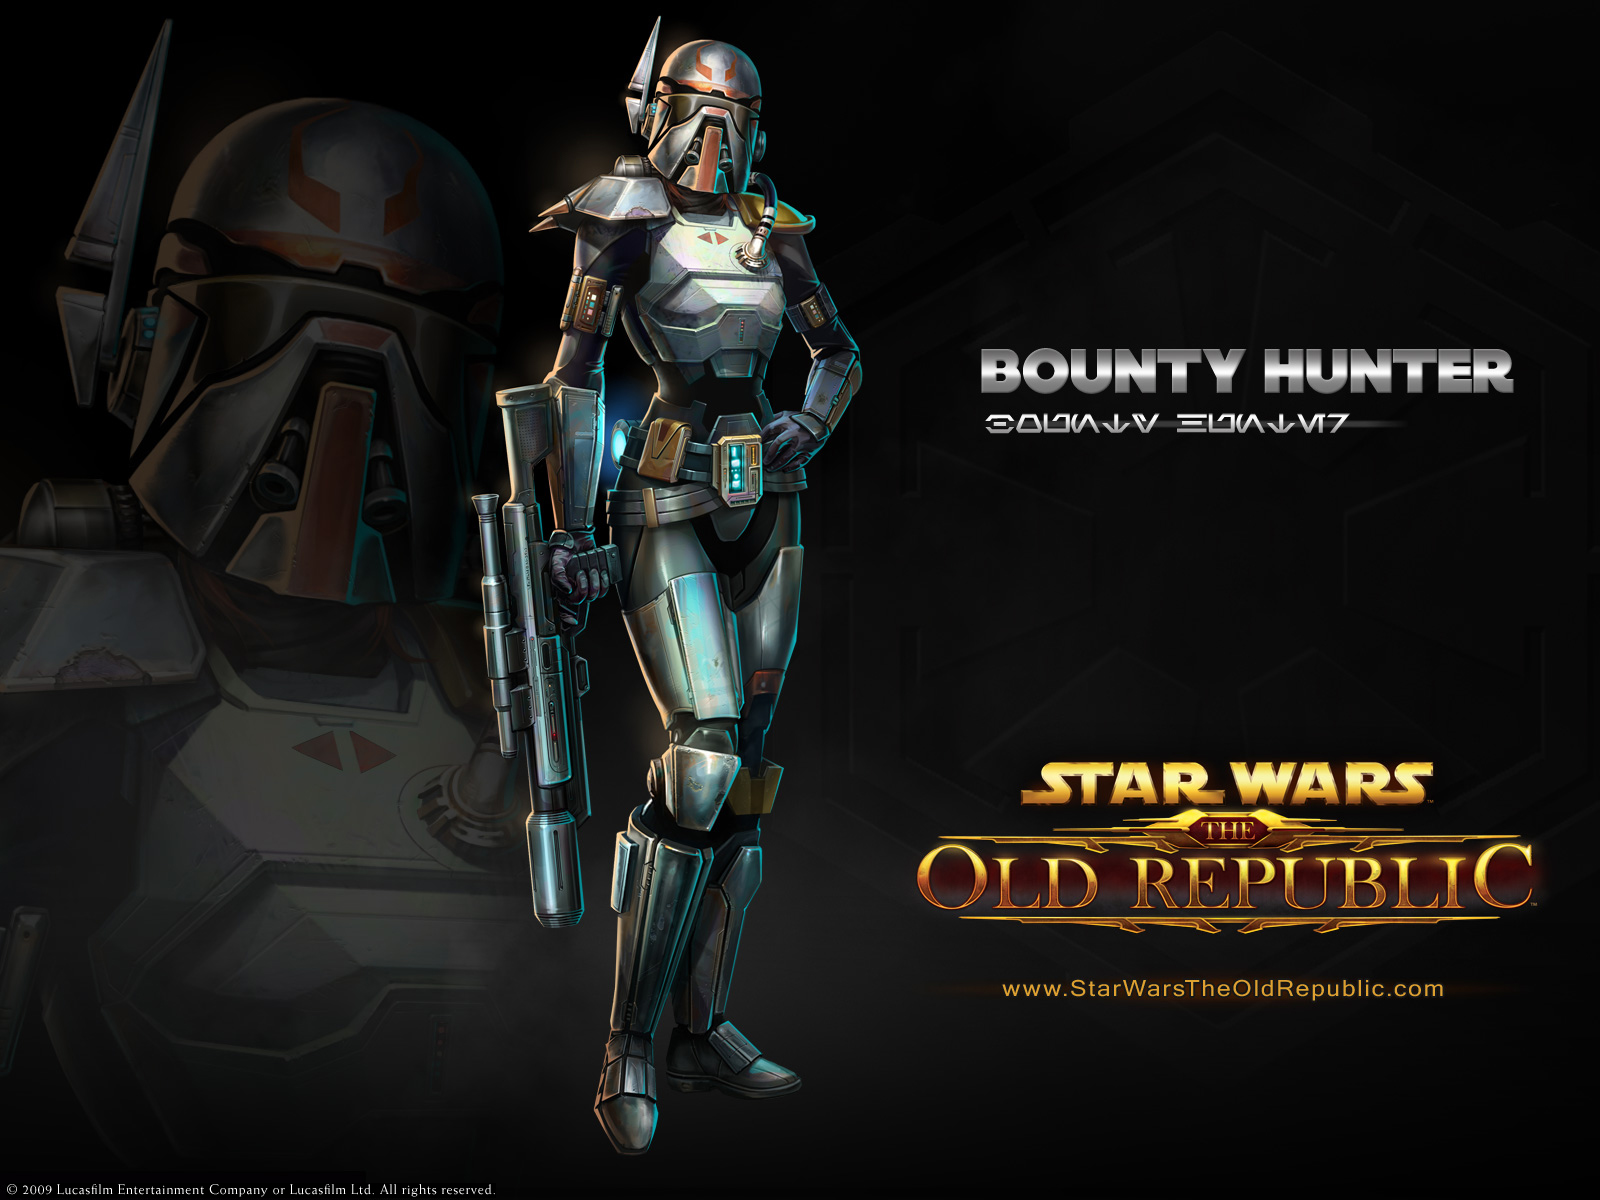 SWTOR Wallpapers Star Wars Wallpapers Star Wars TOR Fever SWTOR 1600x1200